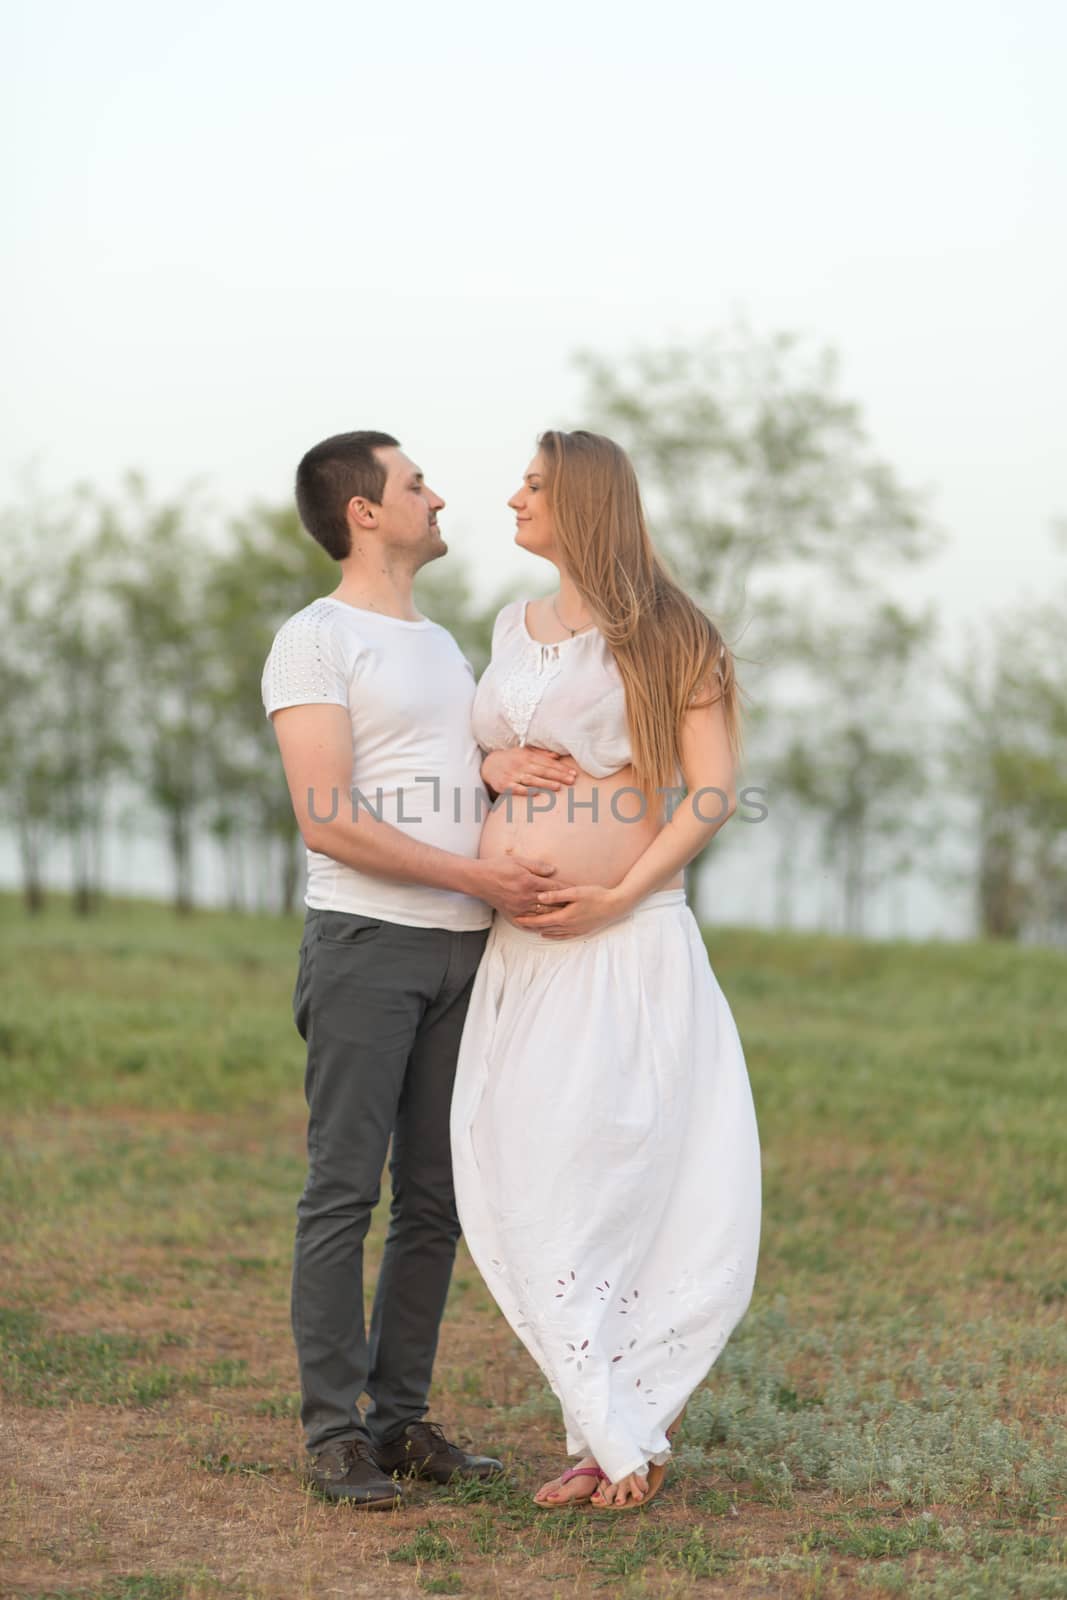 Happy moments of pregnancy. A loving husband with his pregnant wife in the fresh air away from the city.